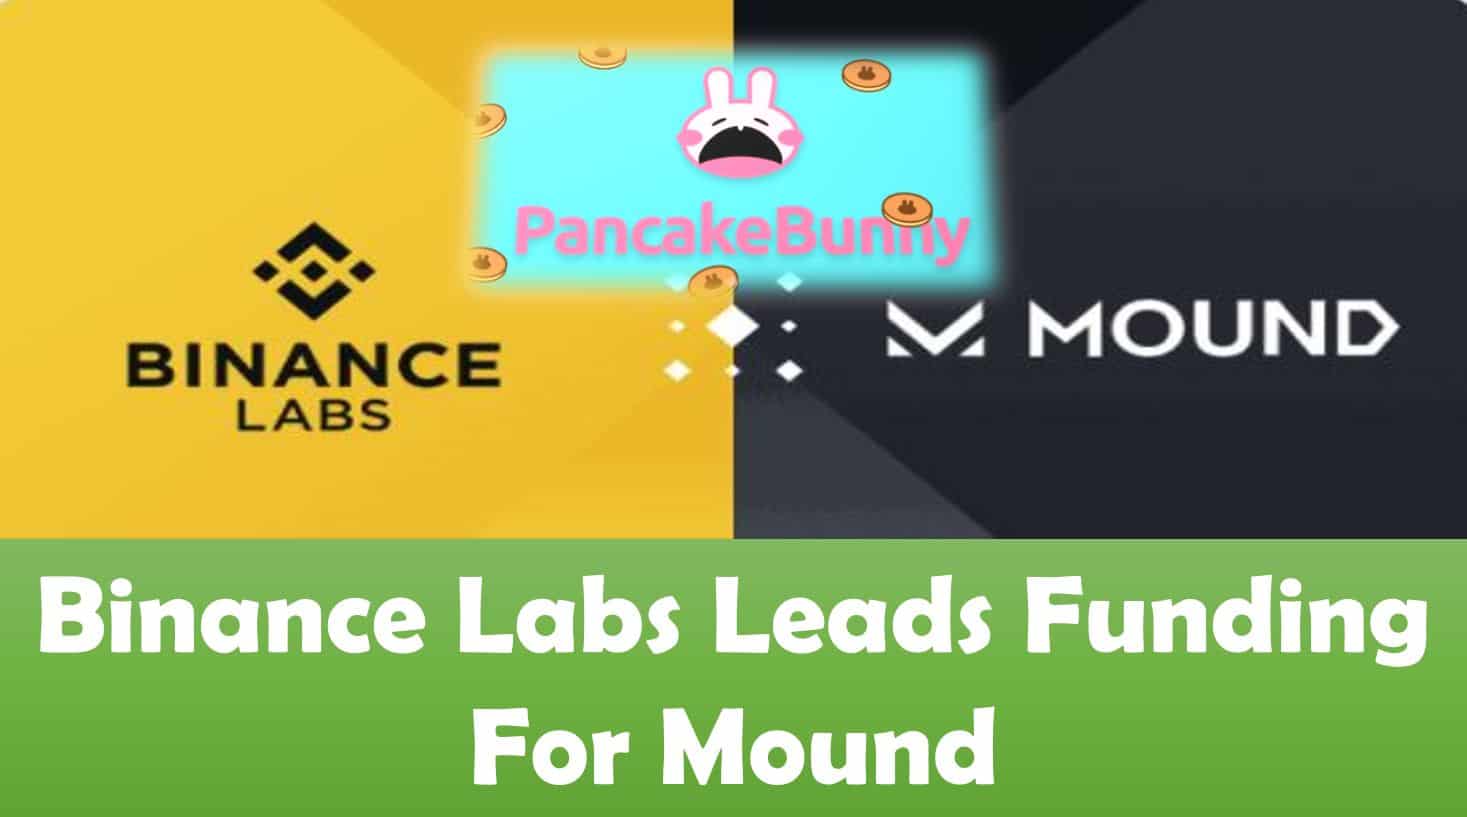 Binance Labs Leads Funding For Mound